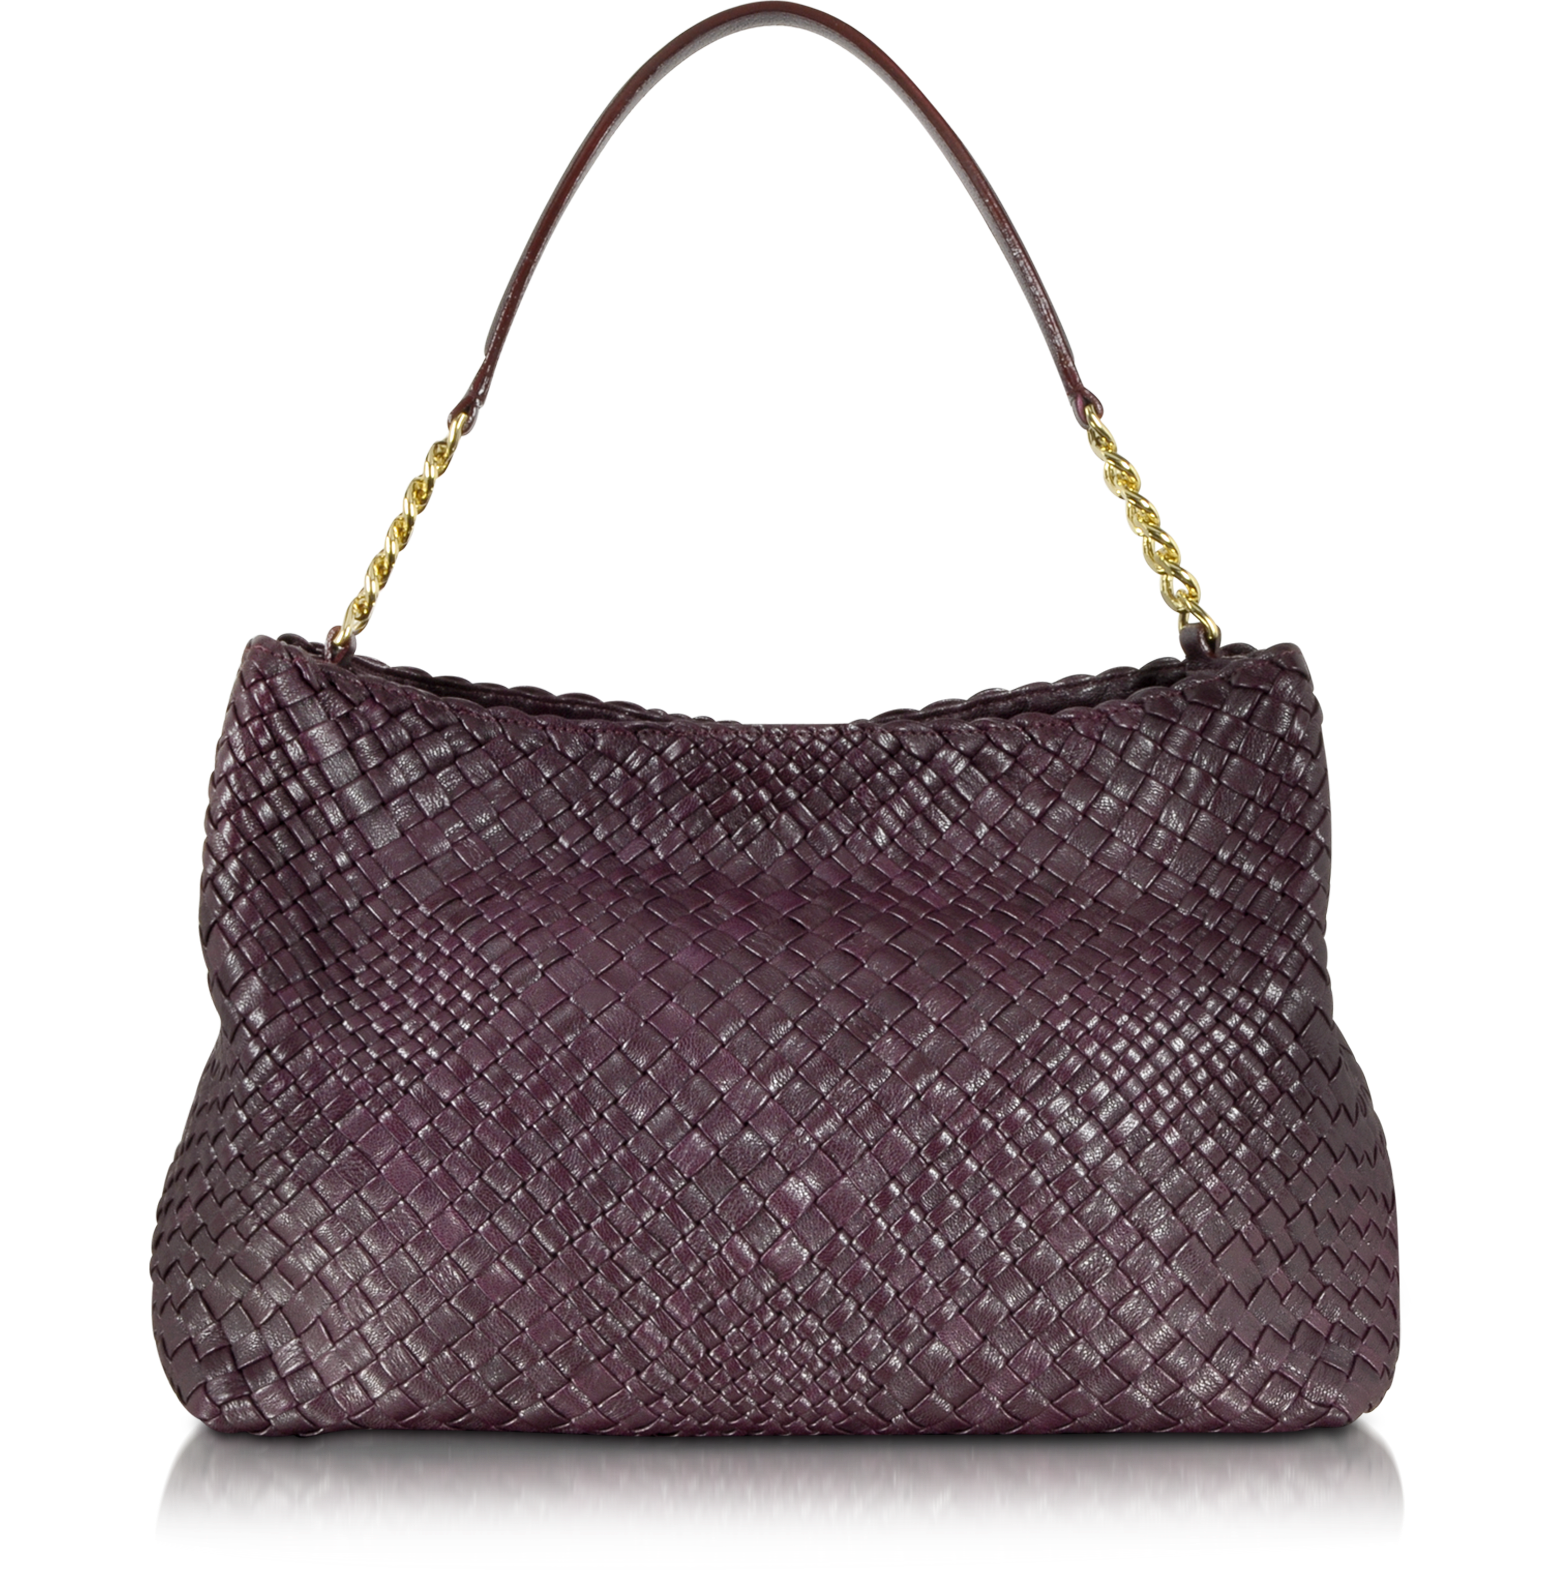 Ghibli Burgundy Woven Leather Tote w/Chain Strap at FORZIERI